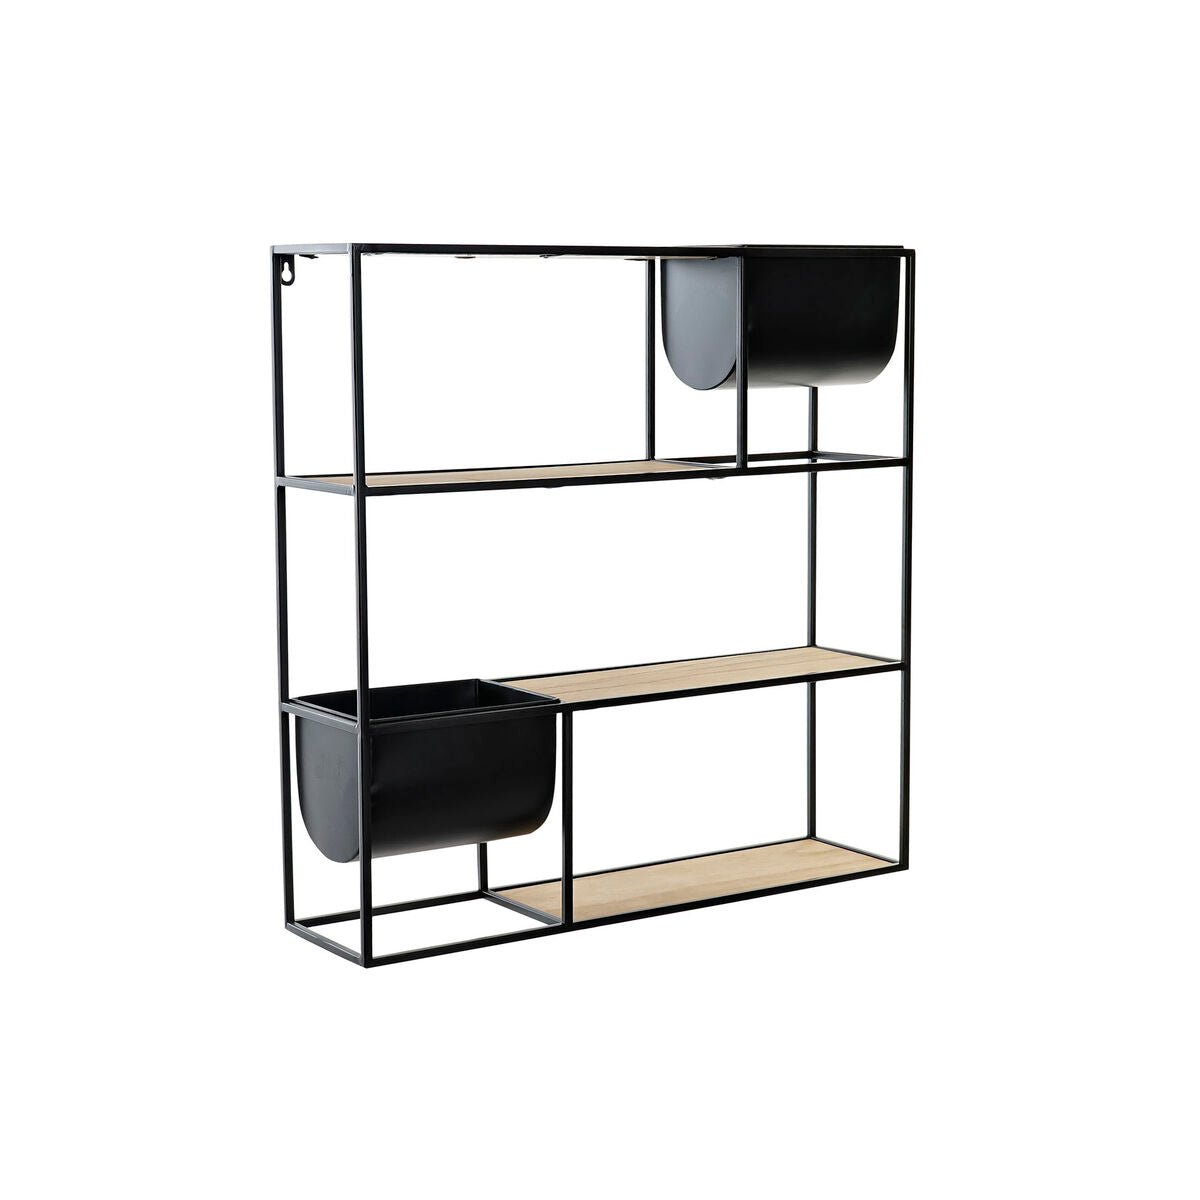 Wall Shelves in Wood and Black Metal Structure (60 x 15 x 60 cm)